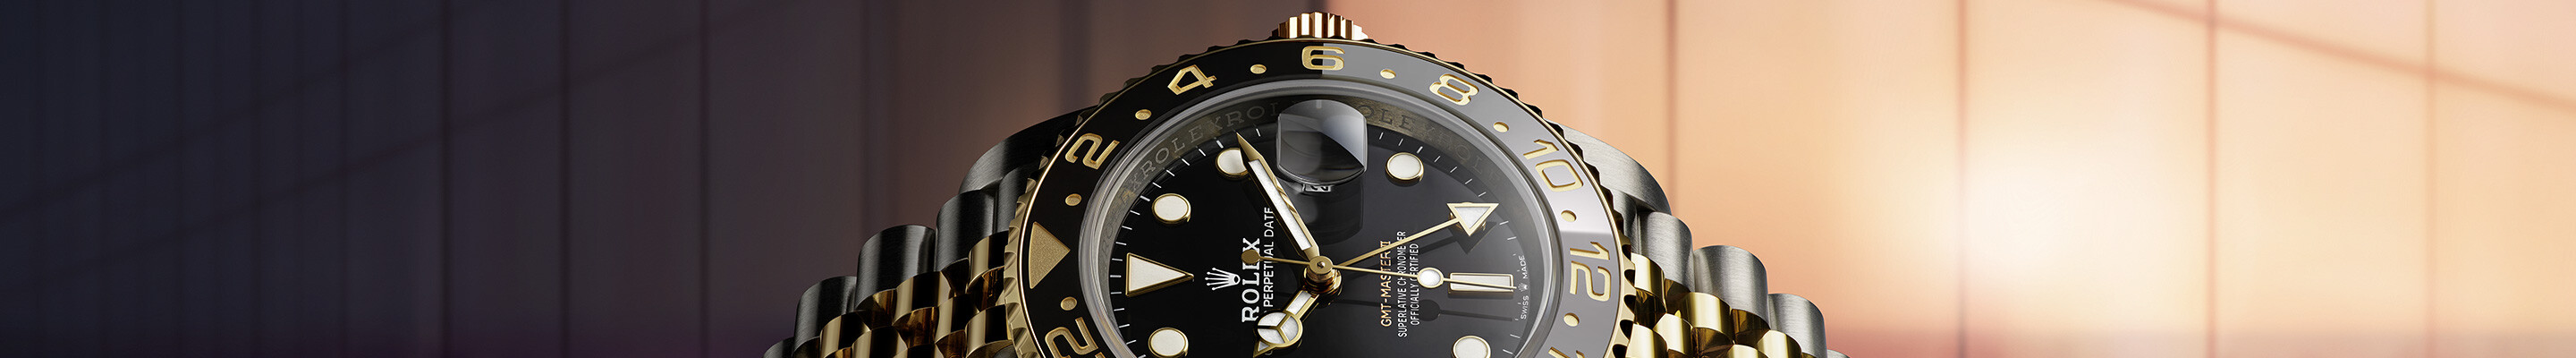 Rolex GMT-Master II at Felopateer Palace